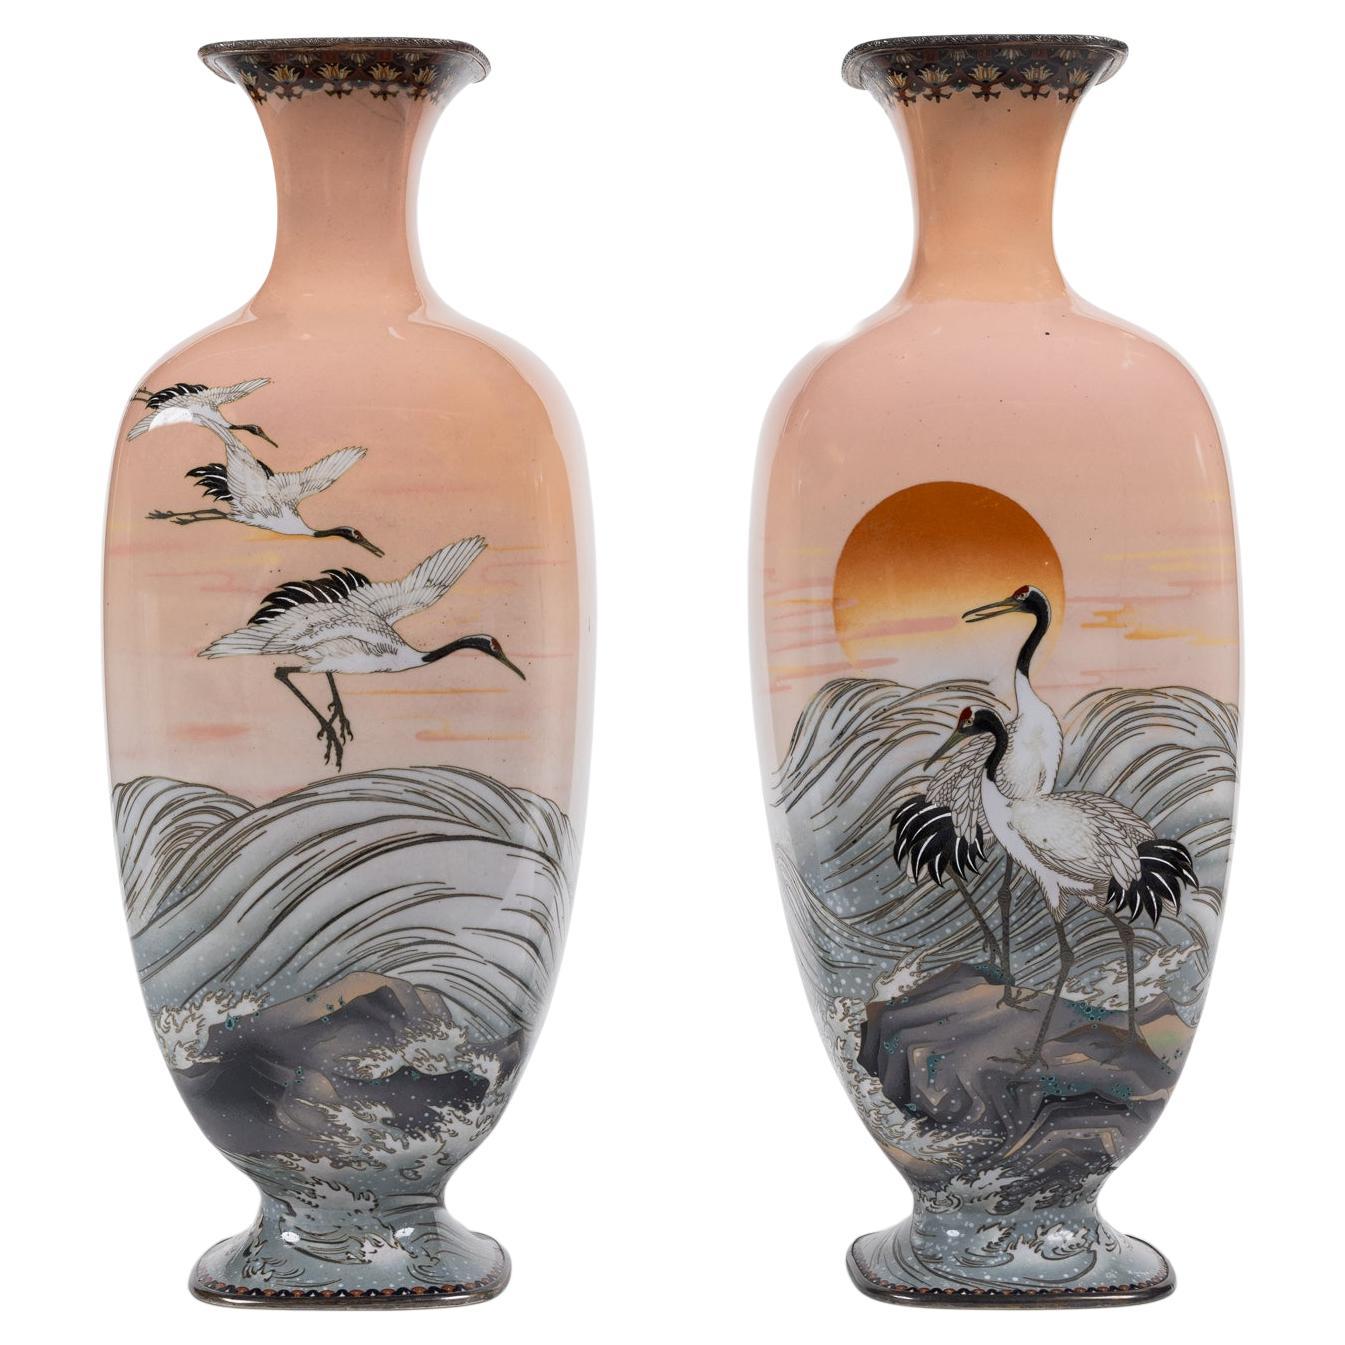 A Large Pair of Japanese Cloisonne Pink-Ground Vases Featuring Sunset and Cranes